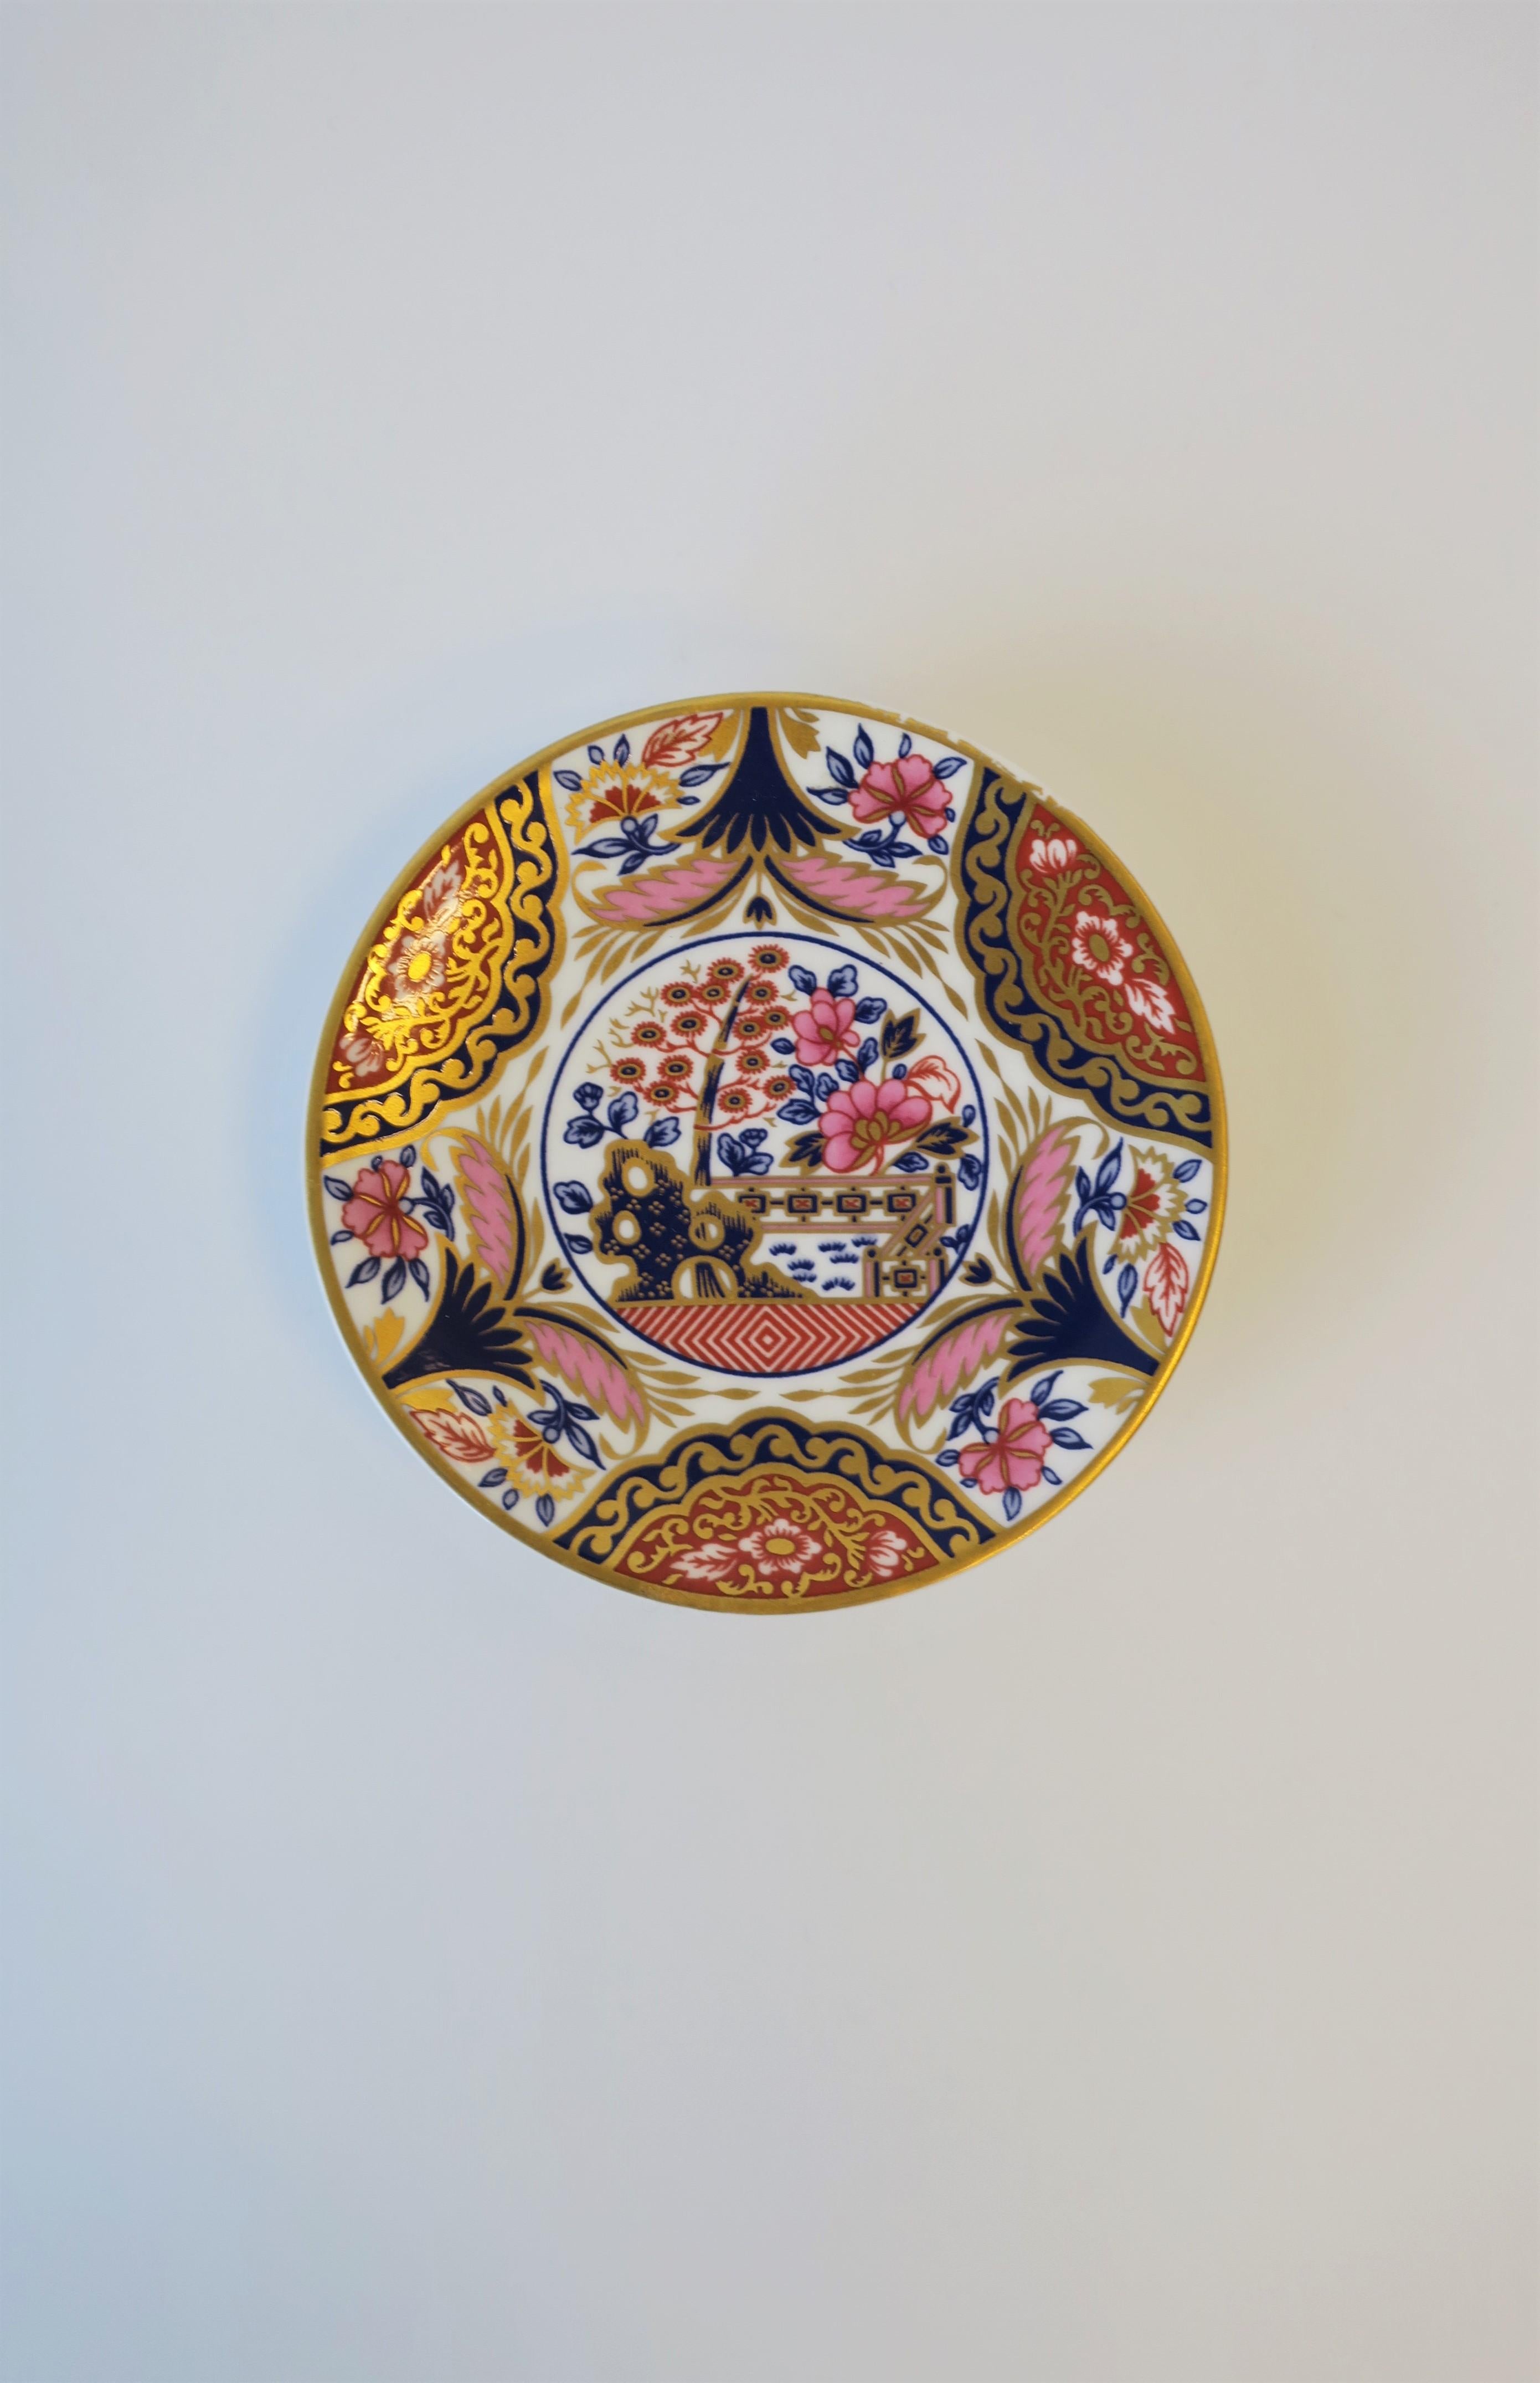 A very beautiful English Spode porcelain 'jewelry' dish with a chinoiserie design, circa 20th century, England. Piece has a beautiful design including its elevated form 'tazza'-like. Back in the day piece was made for the dinner table, but today I'm